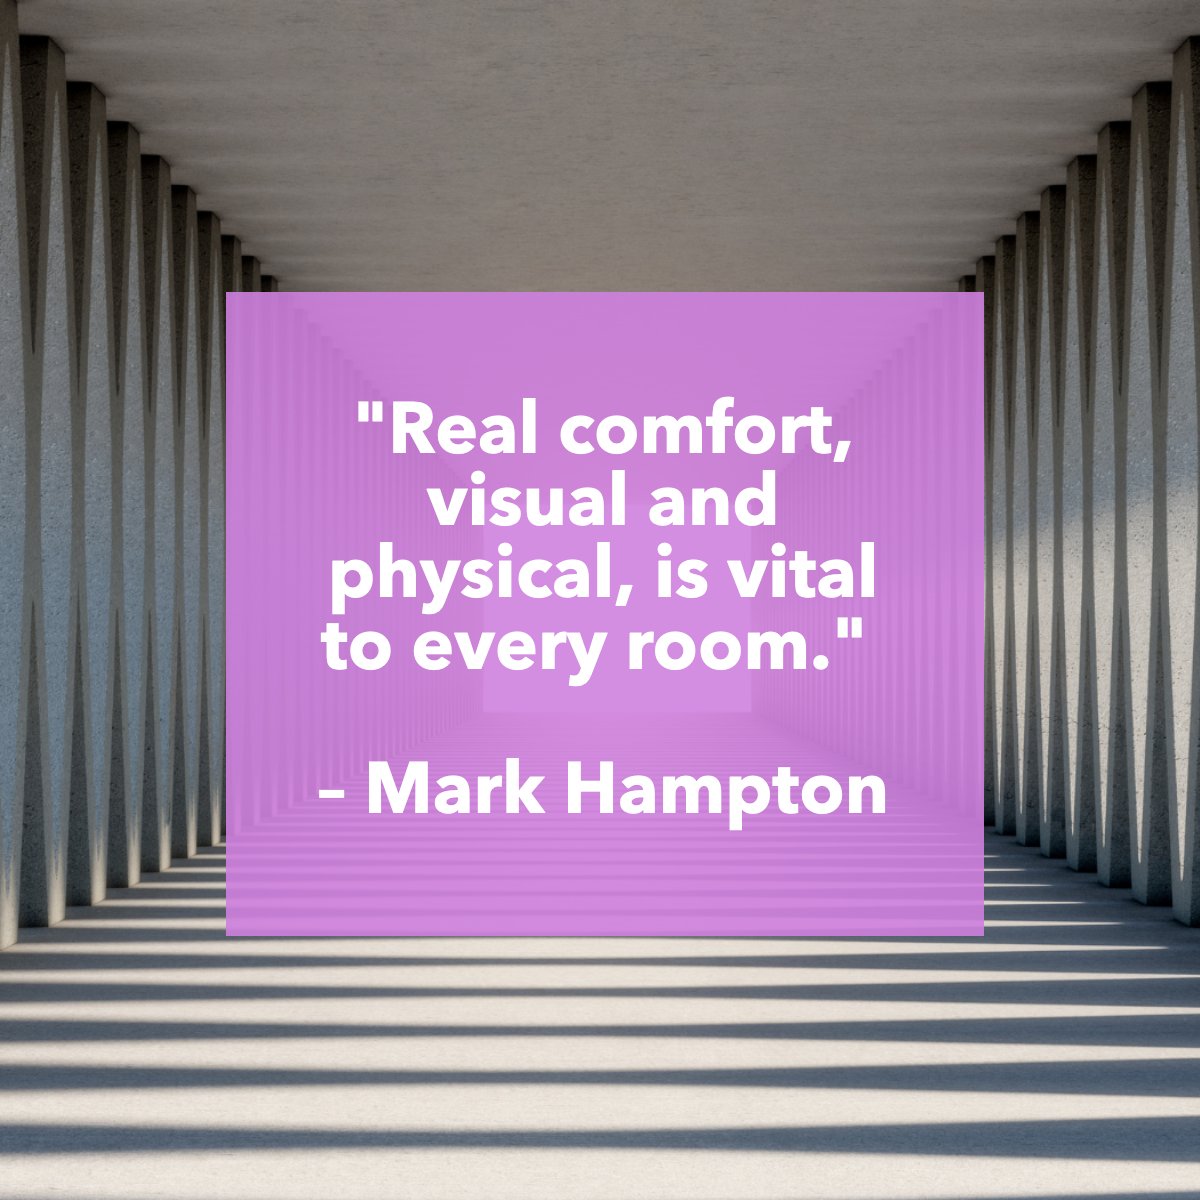 'Real comfort, visual and physical, is vital to every room.'
― Mark Hampton 📖

#quote #quoteoftheday #comfort #design #interiordesign #architecture 
 #karenbruckerrealestate